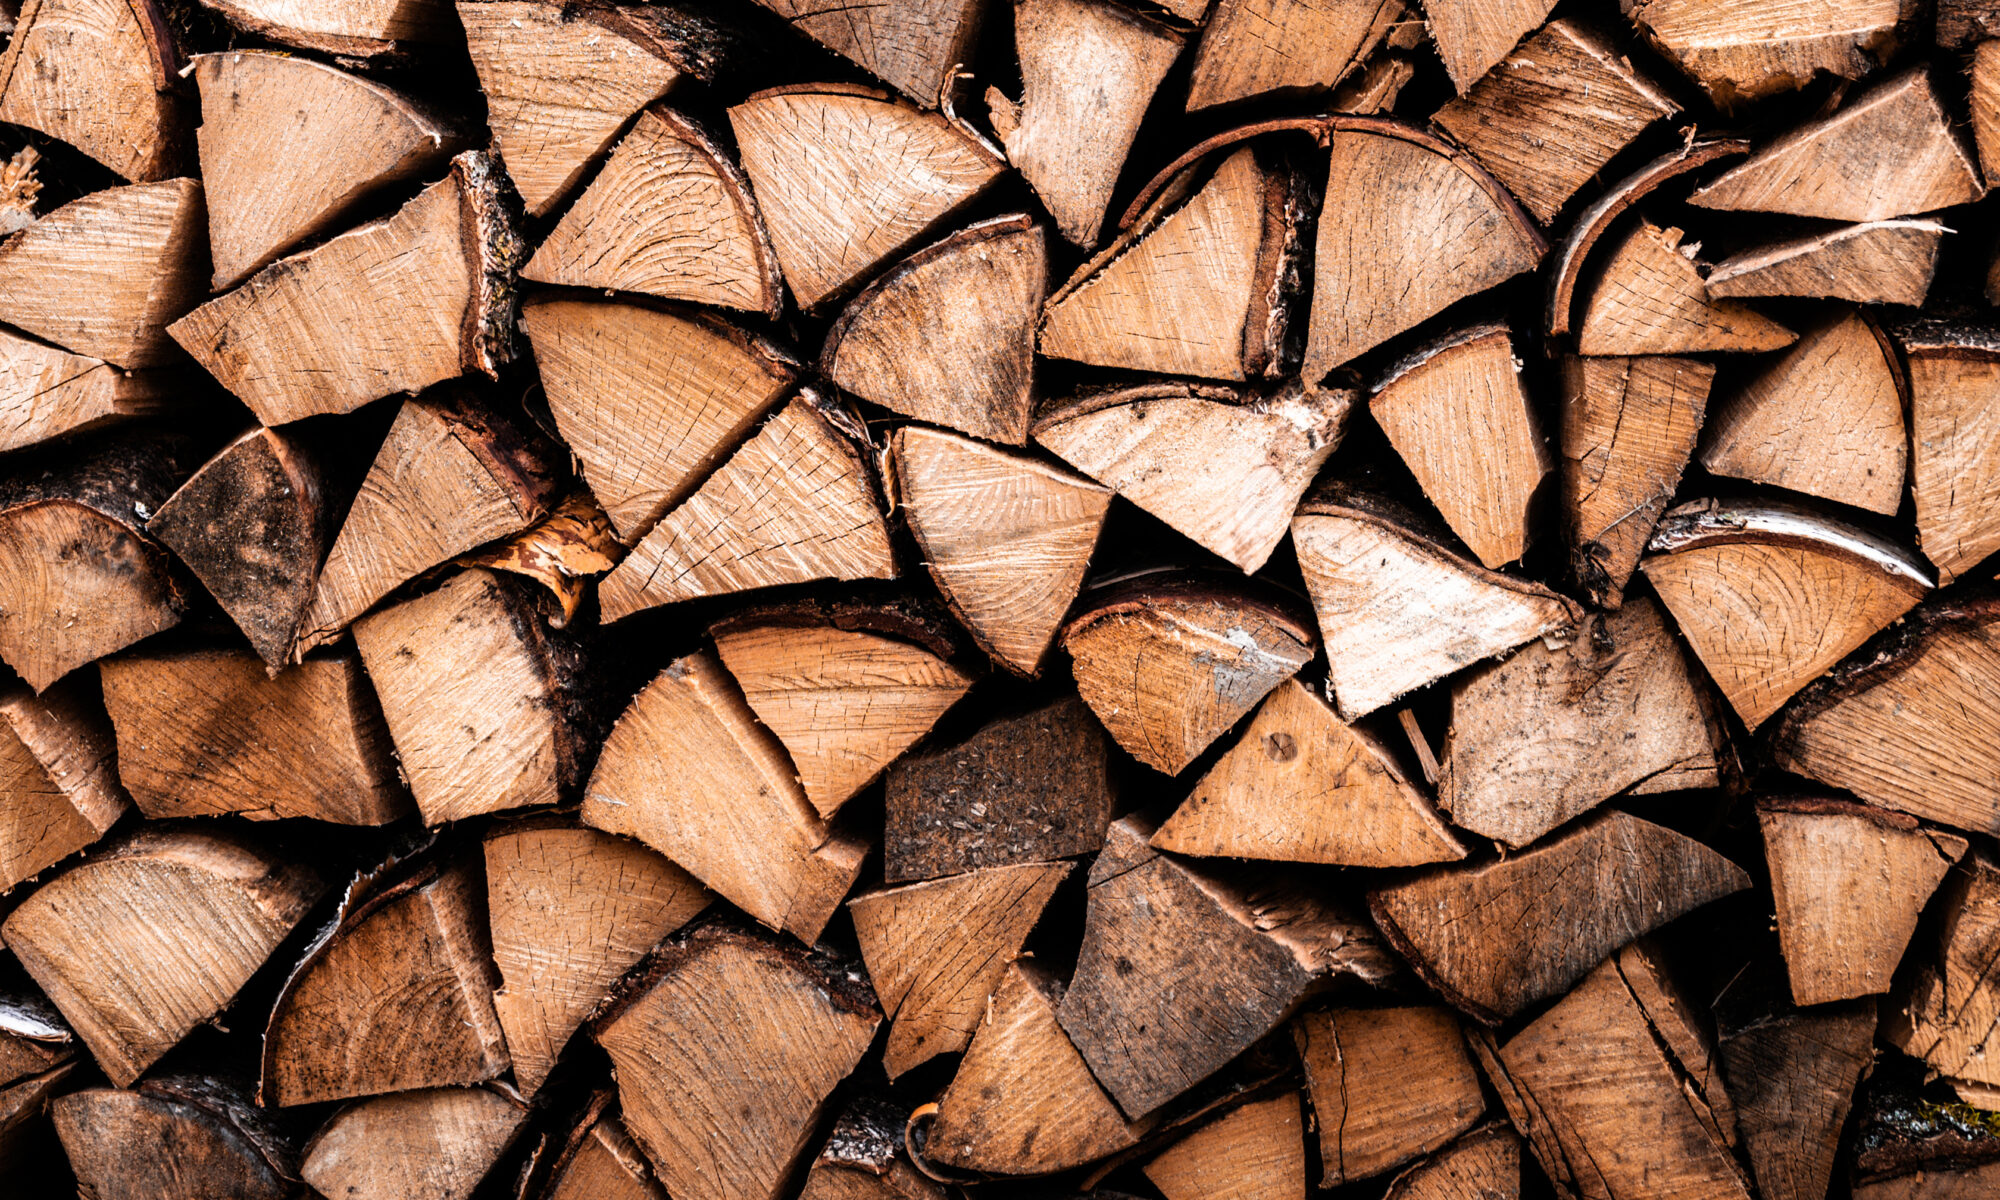 Adobe stock photo of a stack of firewood